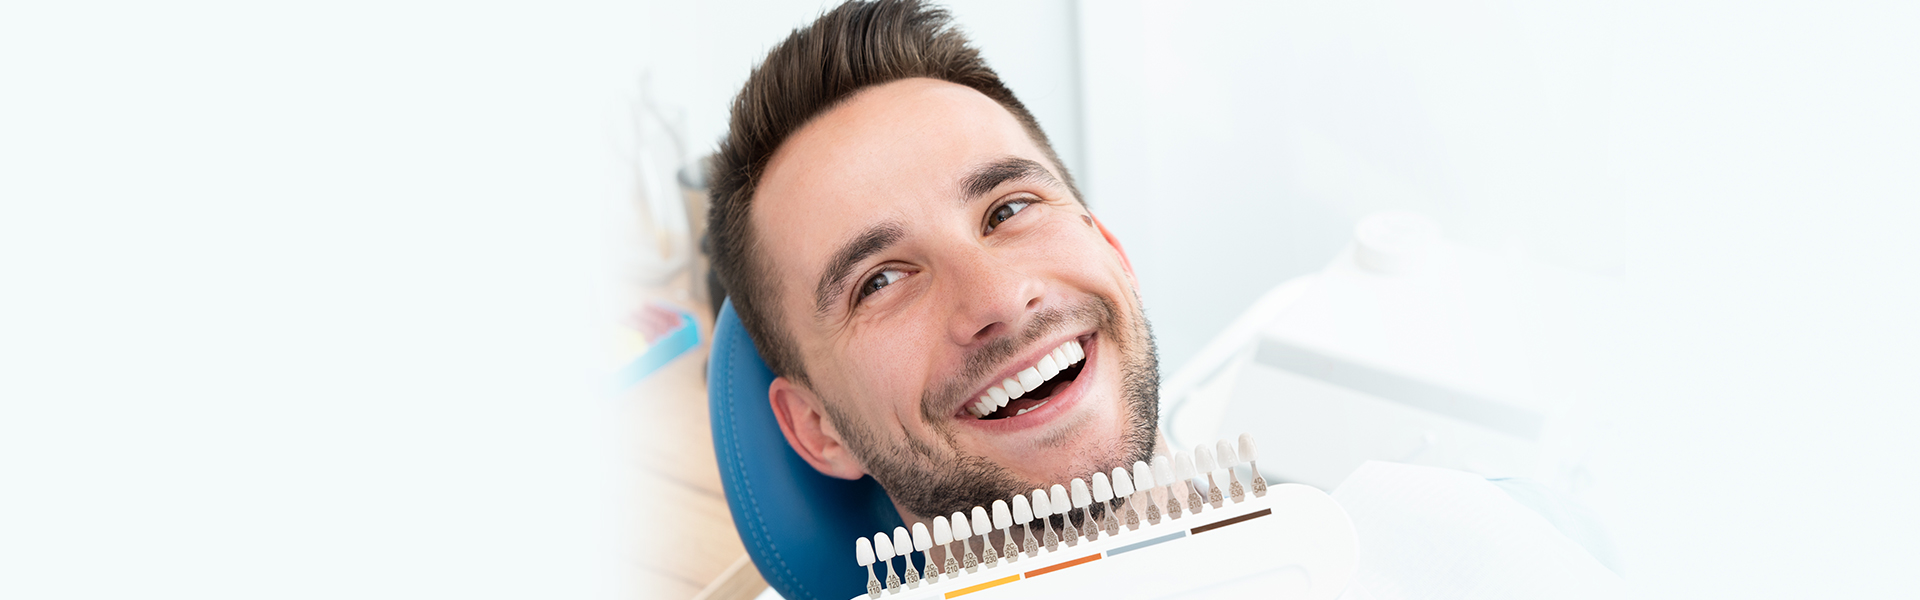 Is a Veneer the Best Treatment for an Overbite?